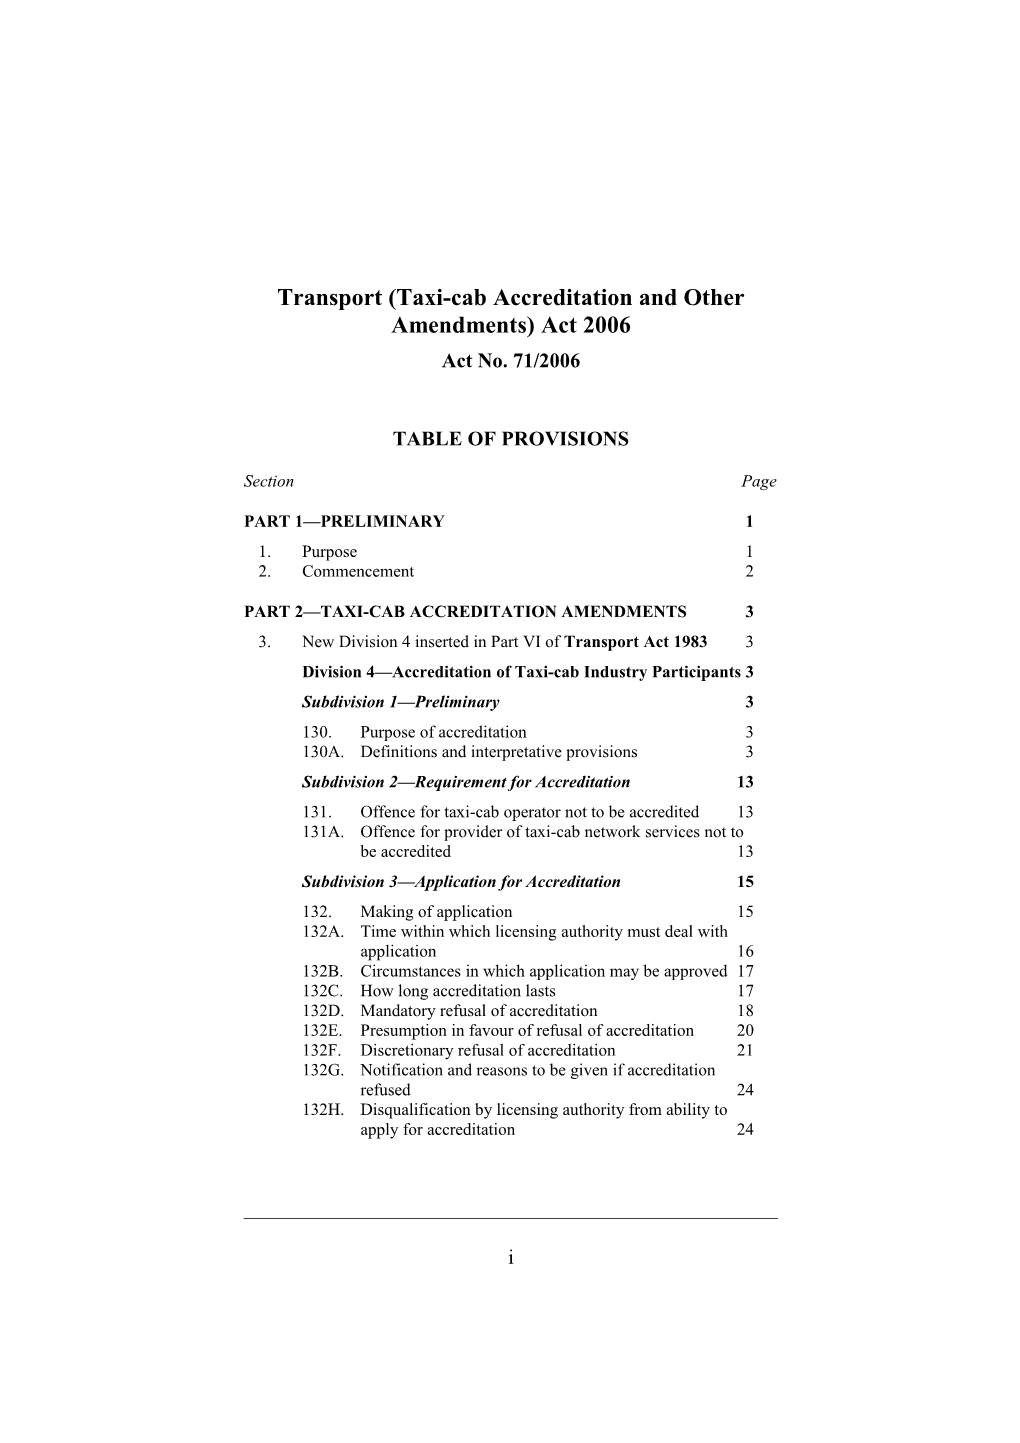 Transport (Taxi-Cab Accreditation and Other Amendments) Act 2006